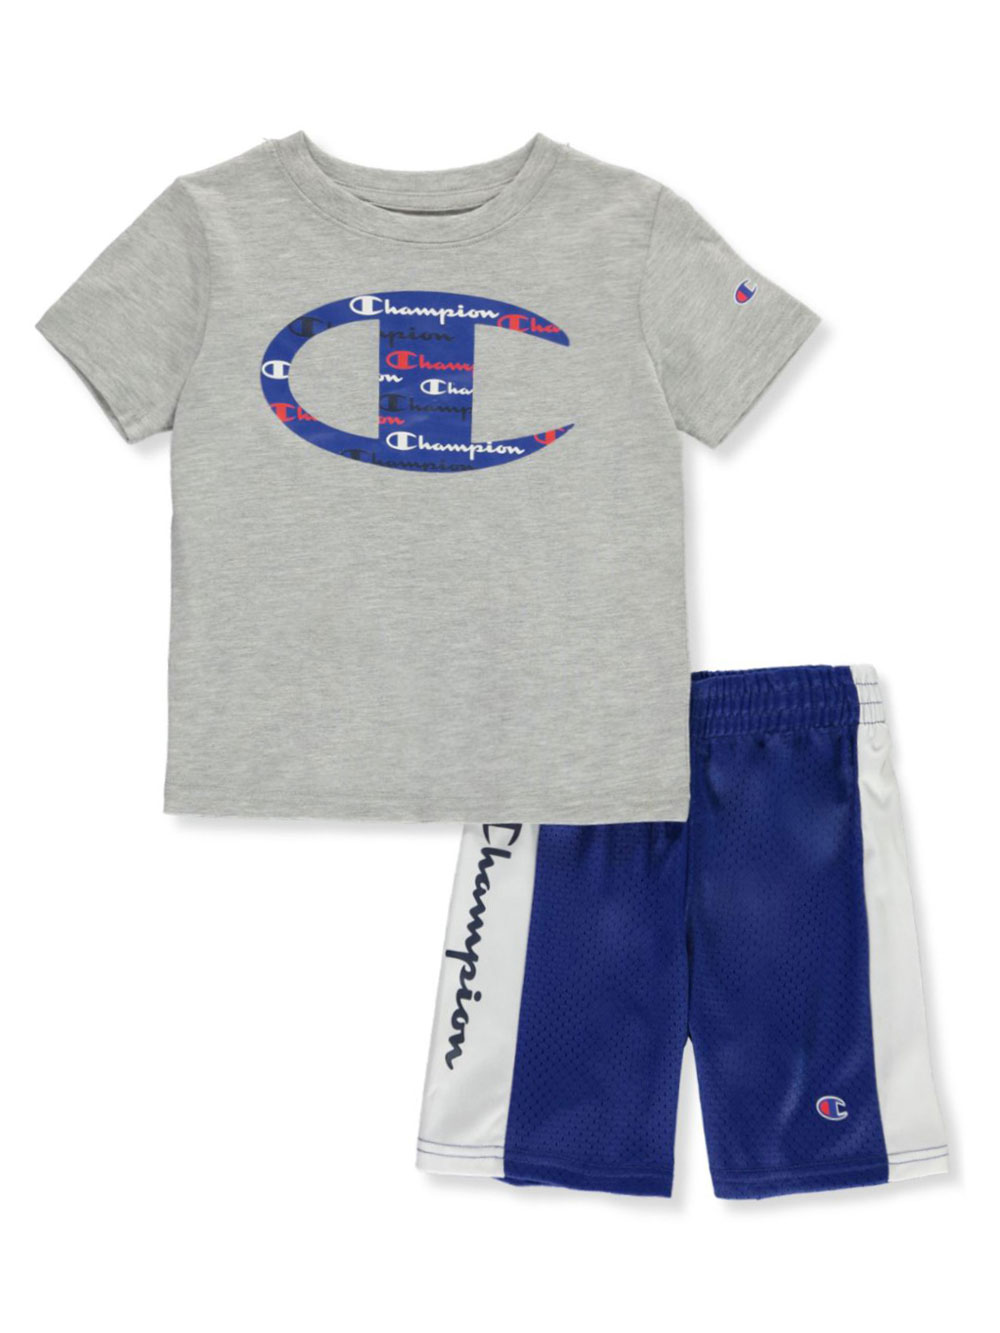 outfit with champion shirt